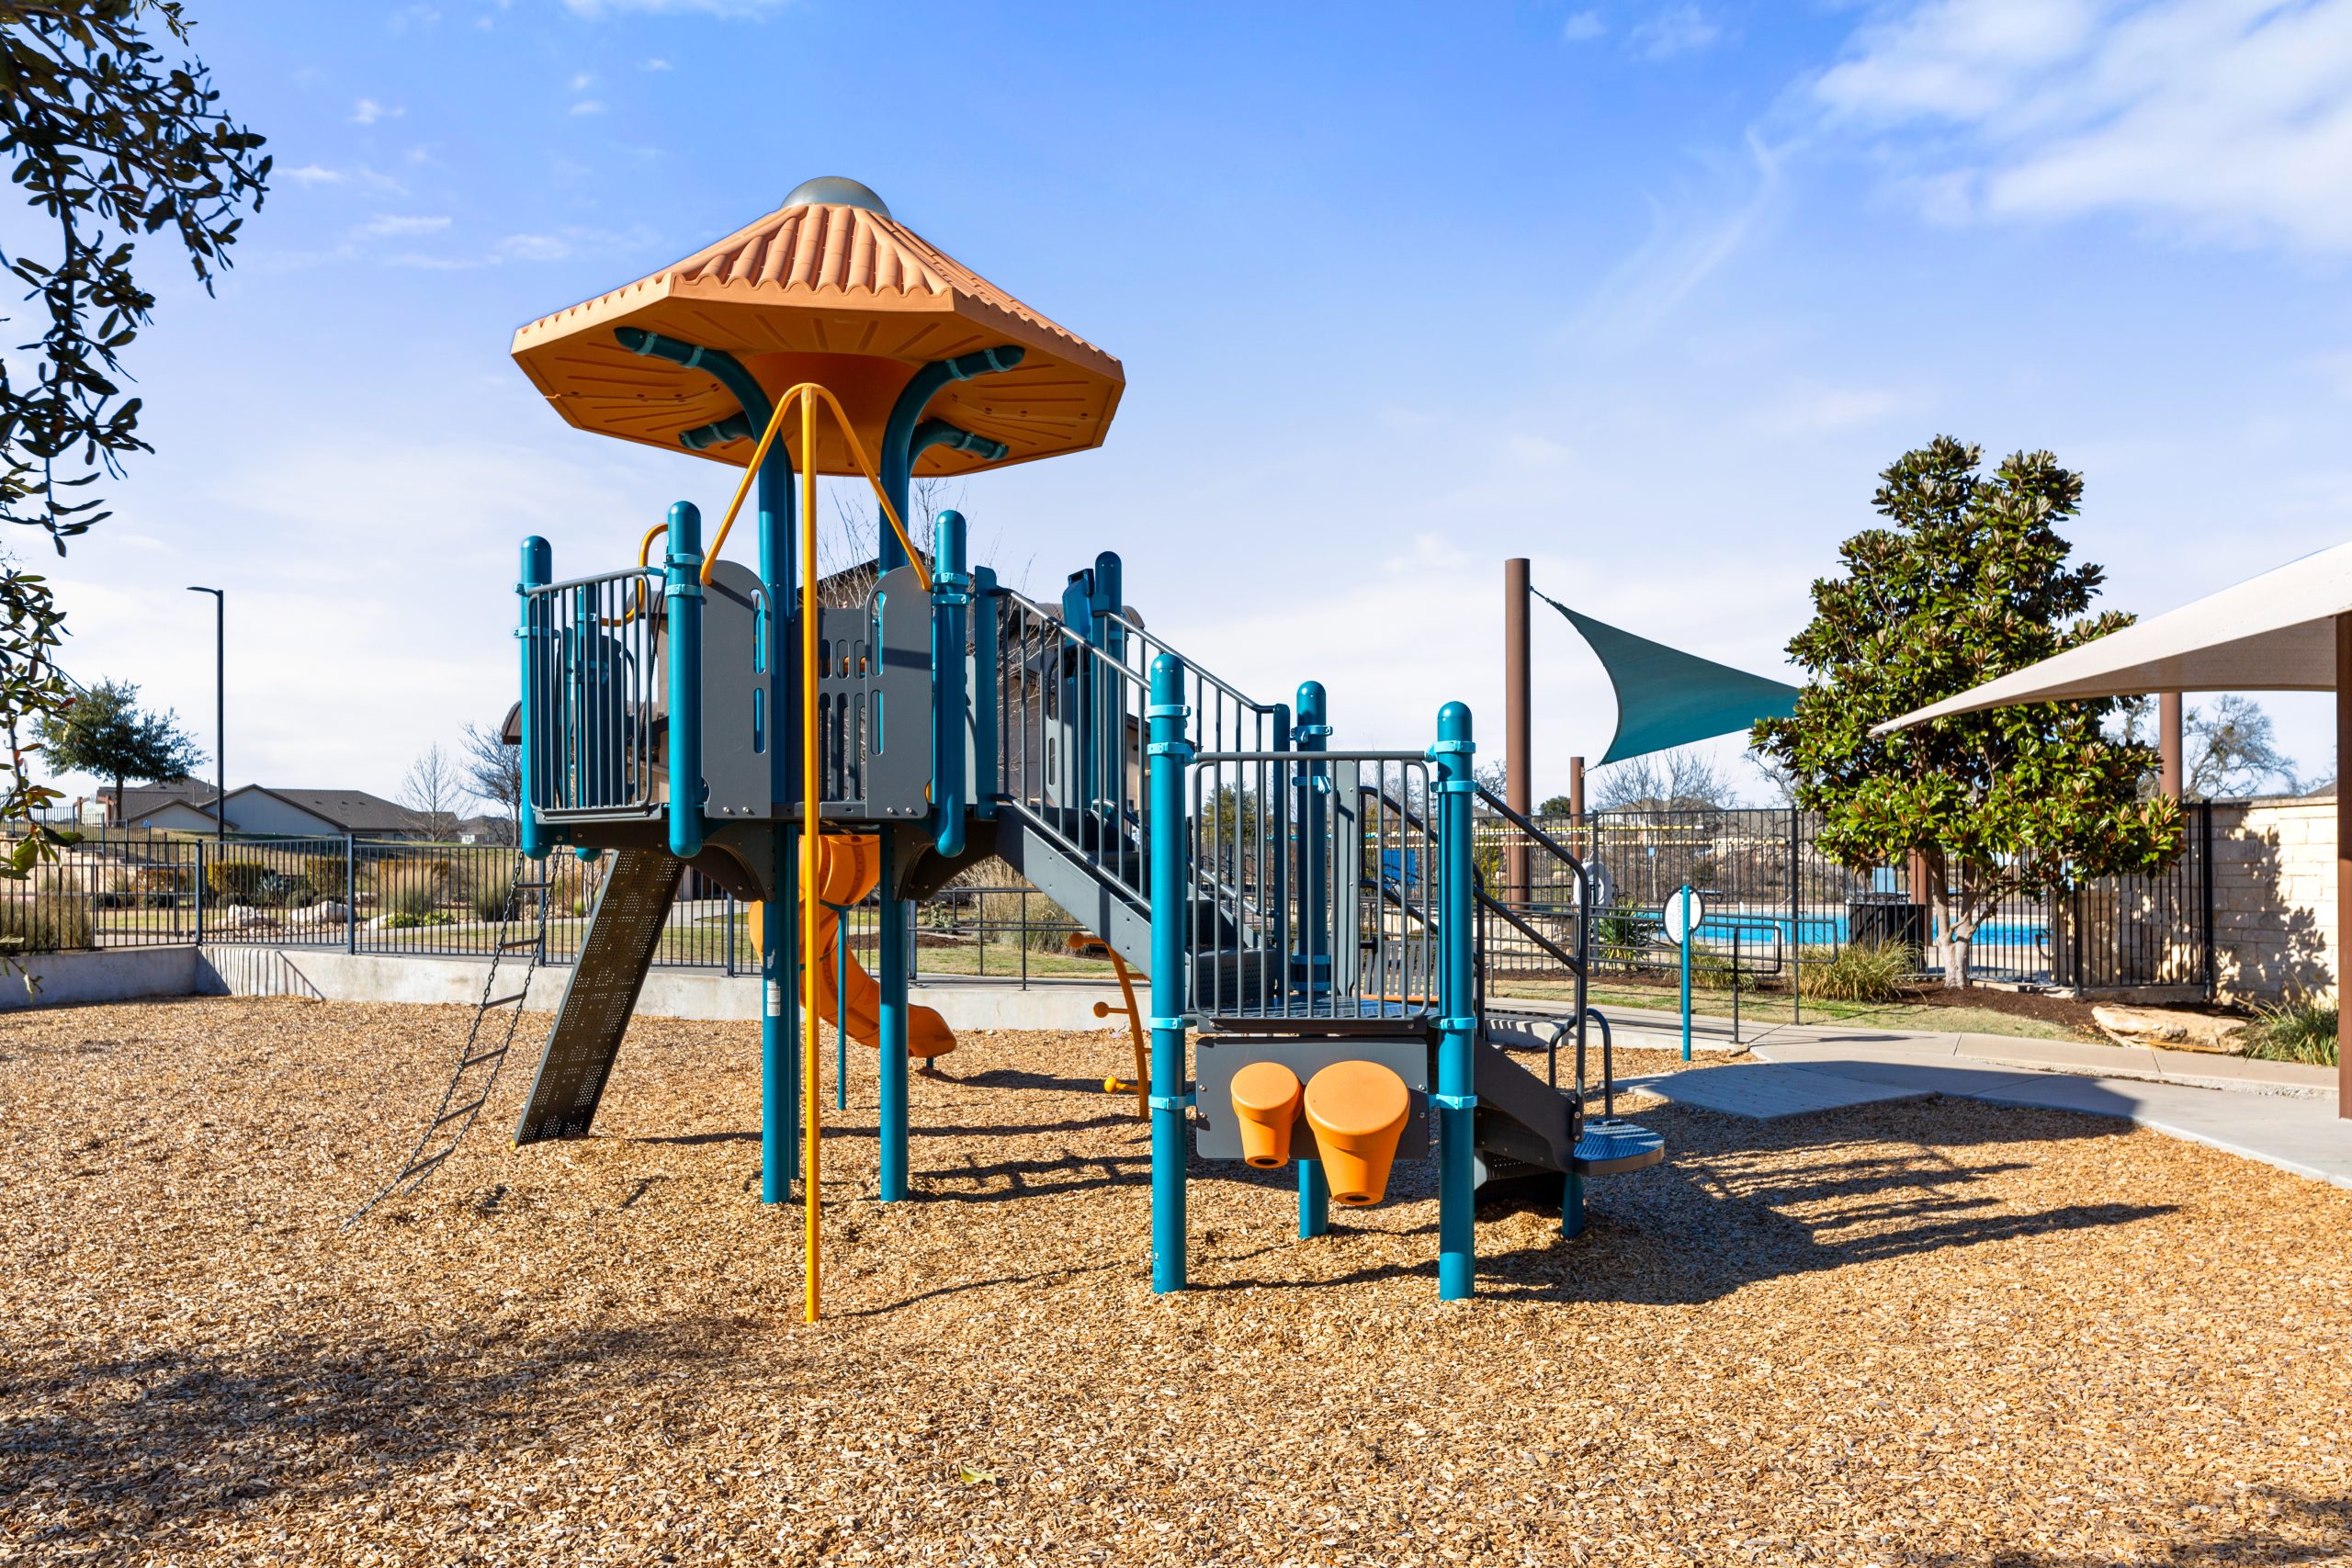 A community playground with activities for kids